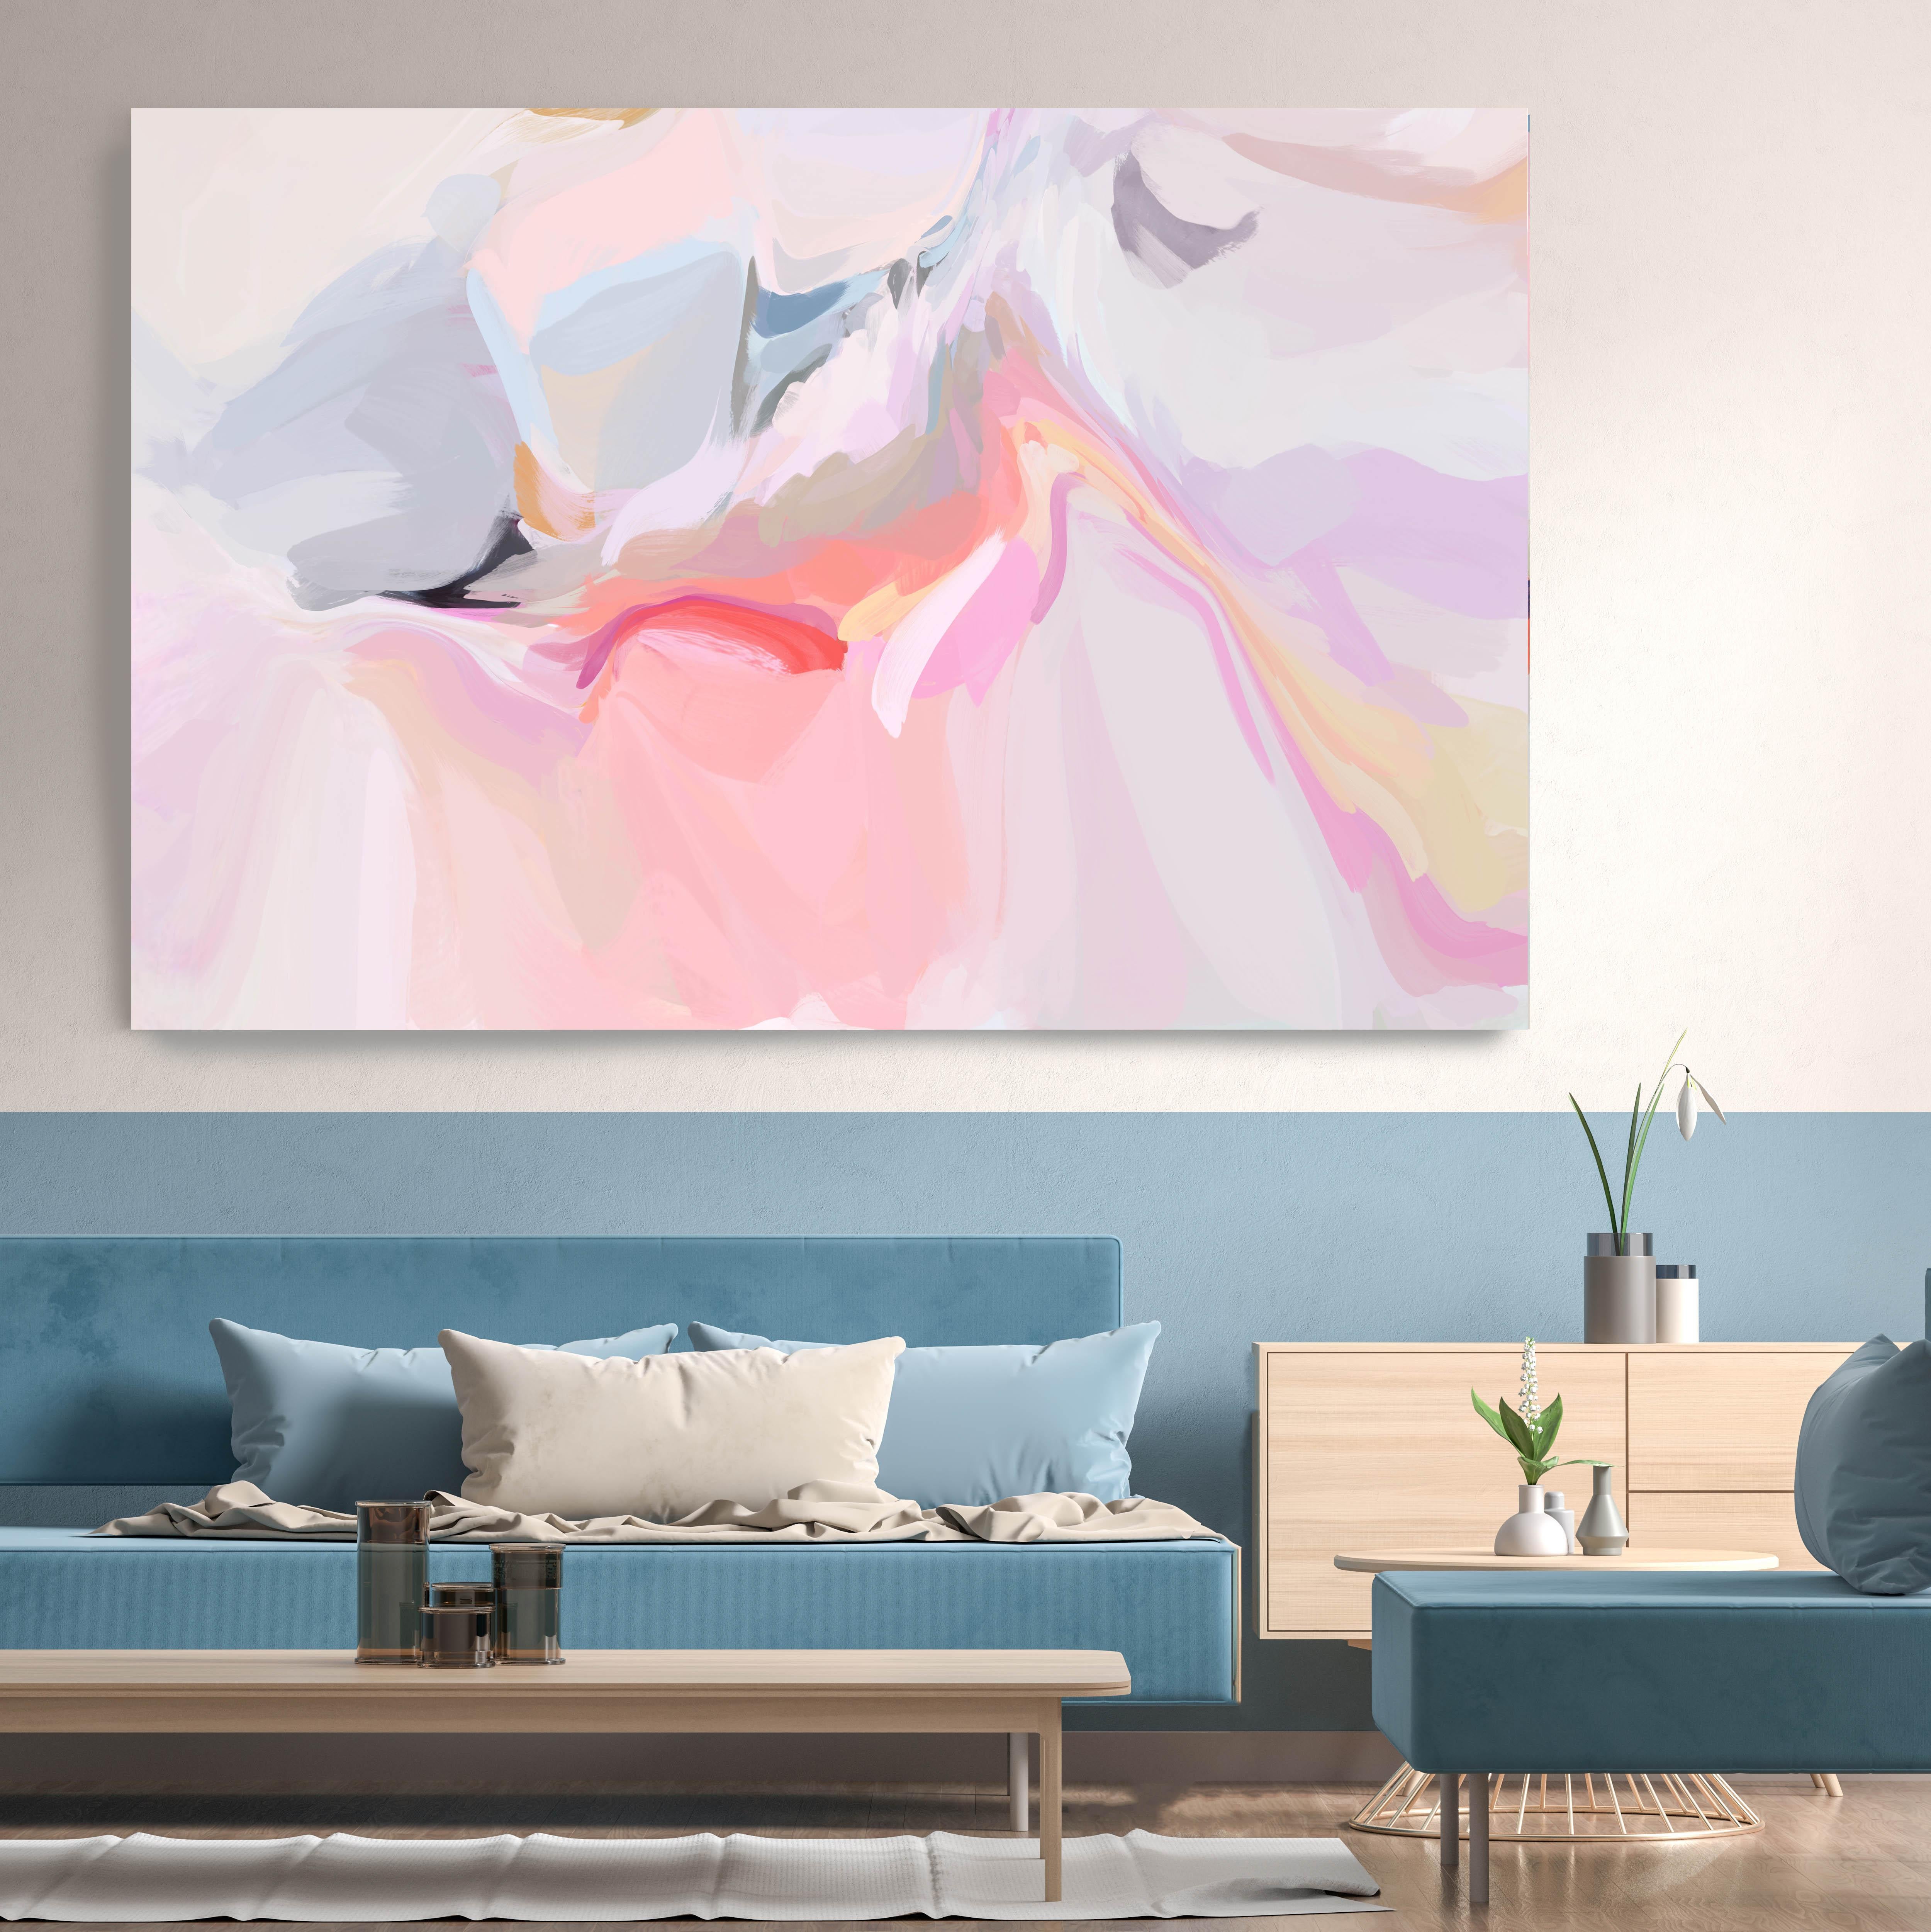 Irena Orlov Abstract Painting - Pink Purple Interior Artwork Mixed Media Painting Canvas 40x60" The birth 2